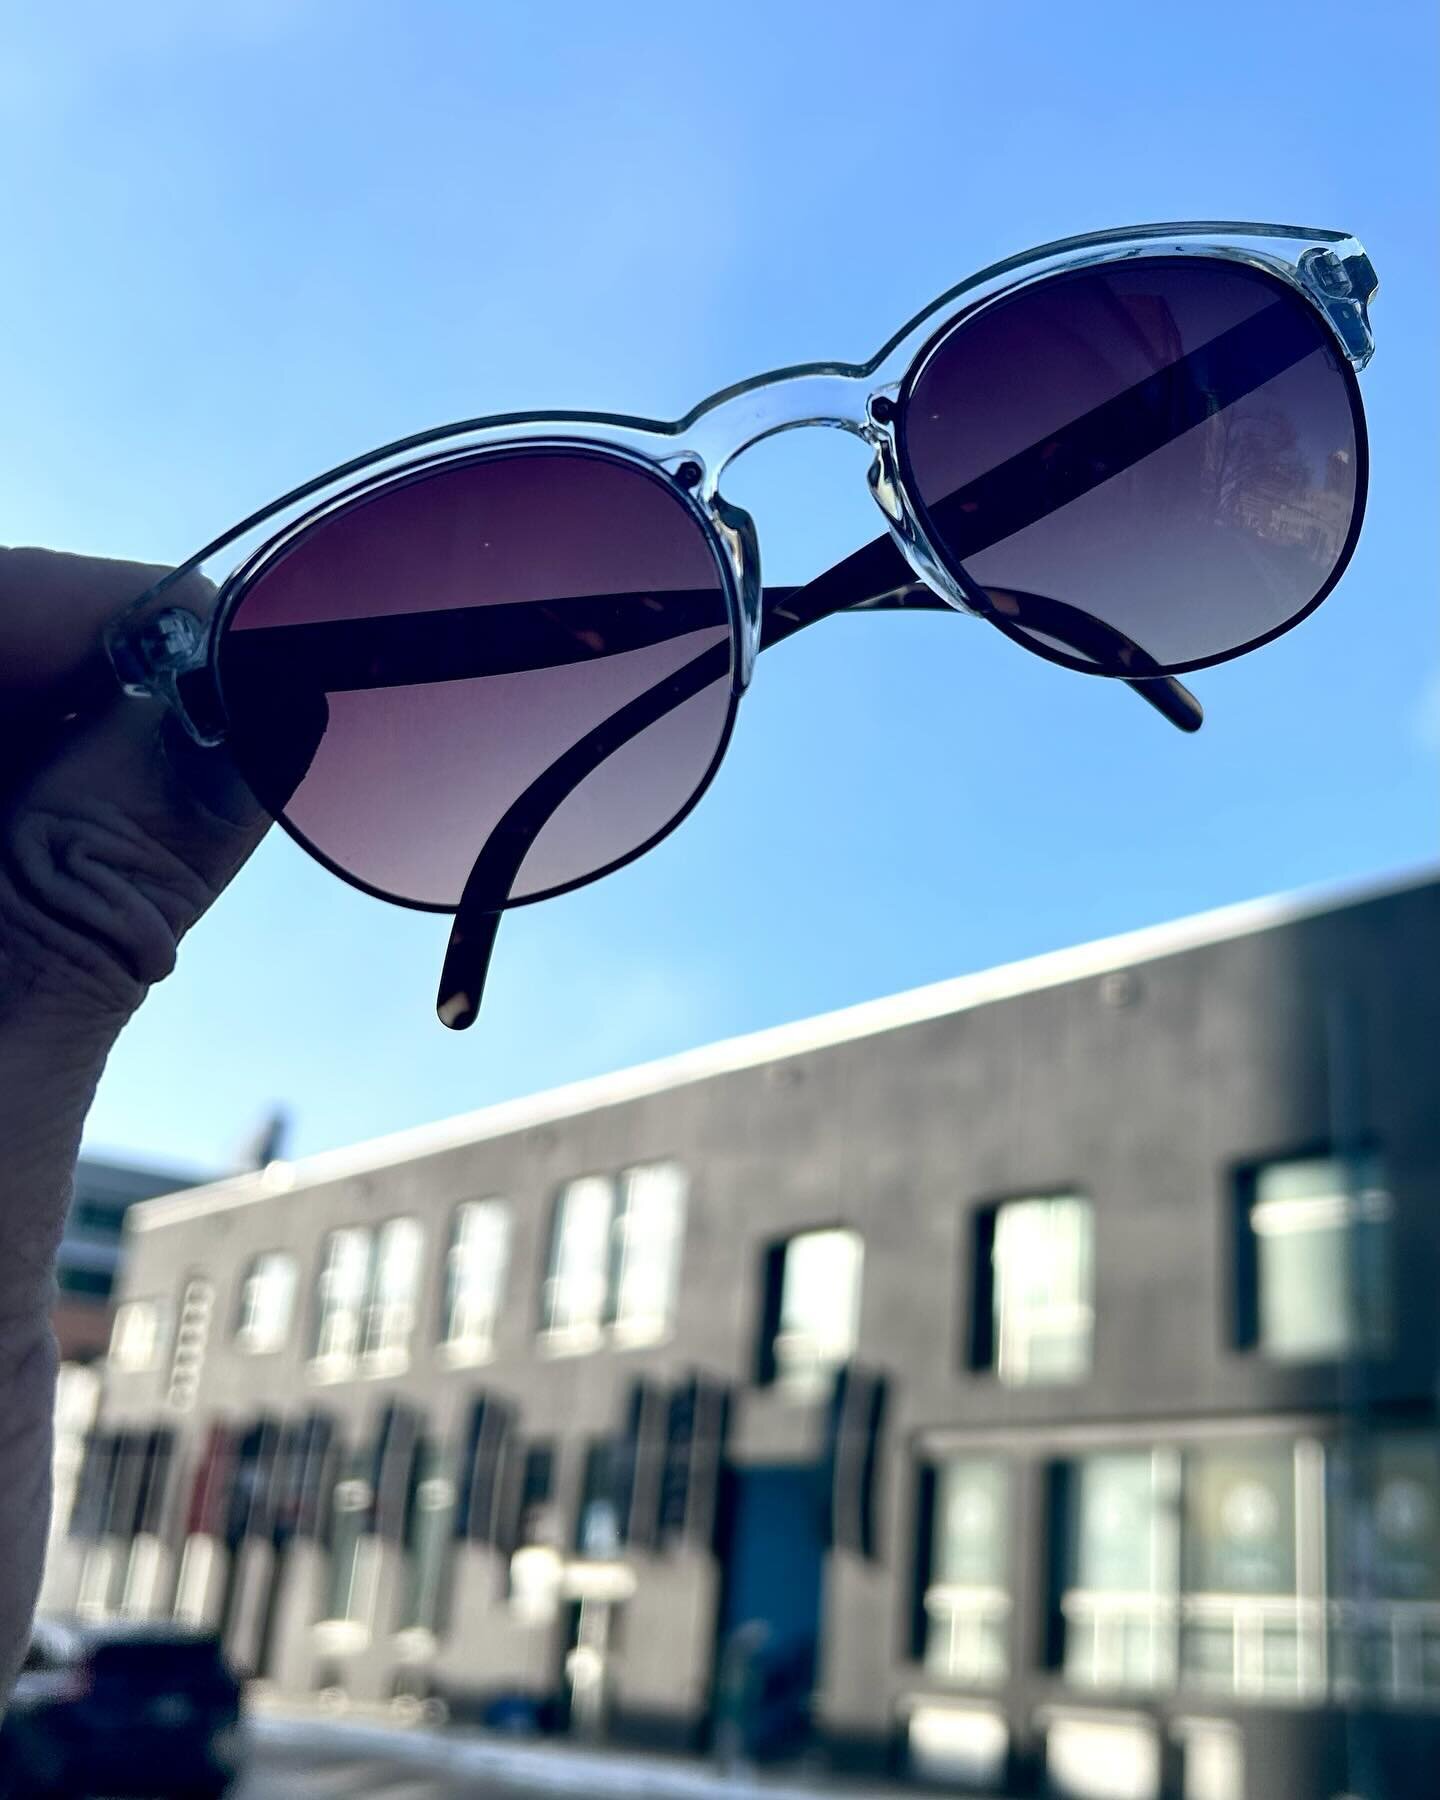 Lazing on a beach, skiing down a diamond run or simply behind the wheel of your ride, if the sun&rsquo;s out @sunski Sunglasses are up for the job of keeping it at bay. Polarized lenses, recycled lightweight frames, and a forever warranty, make them 